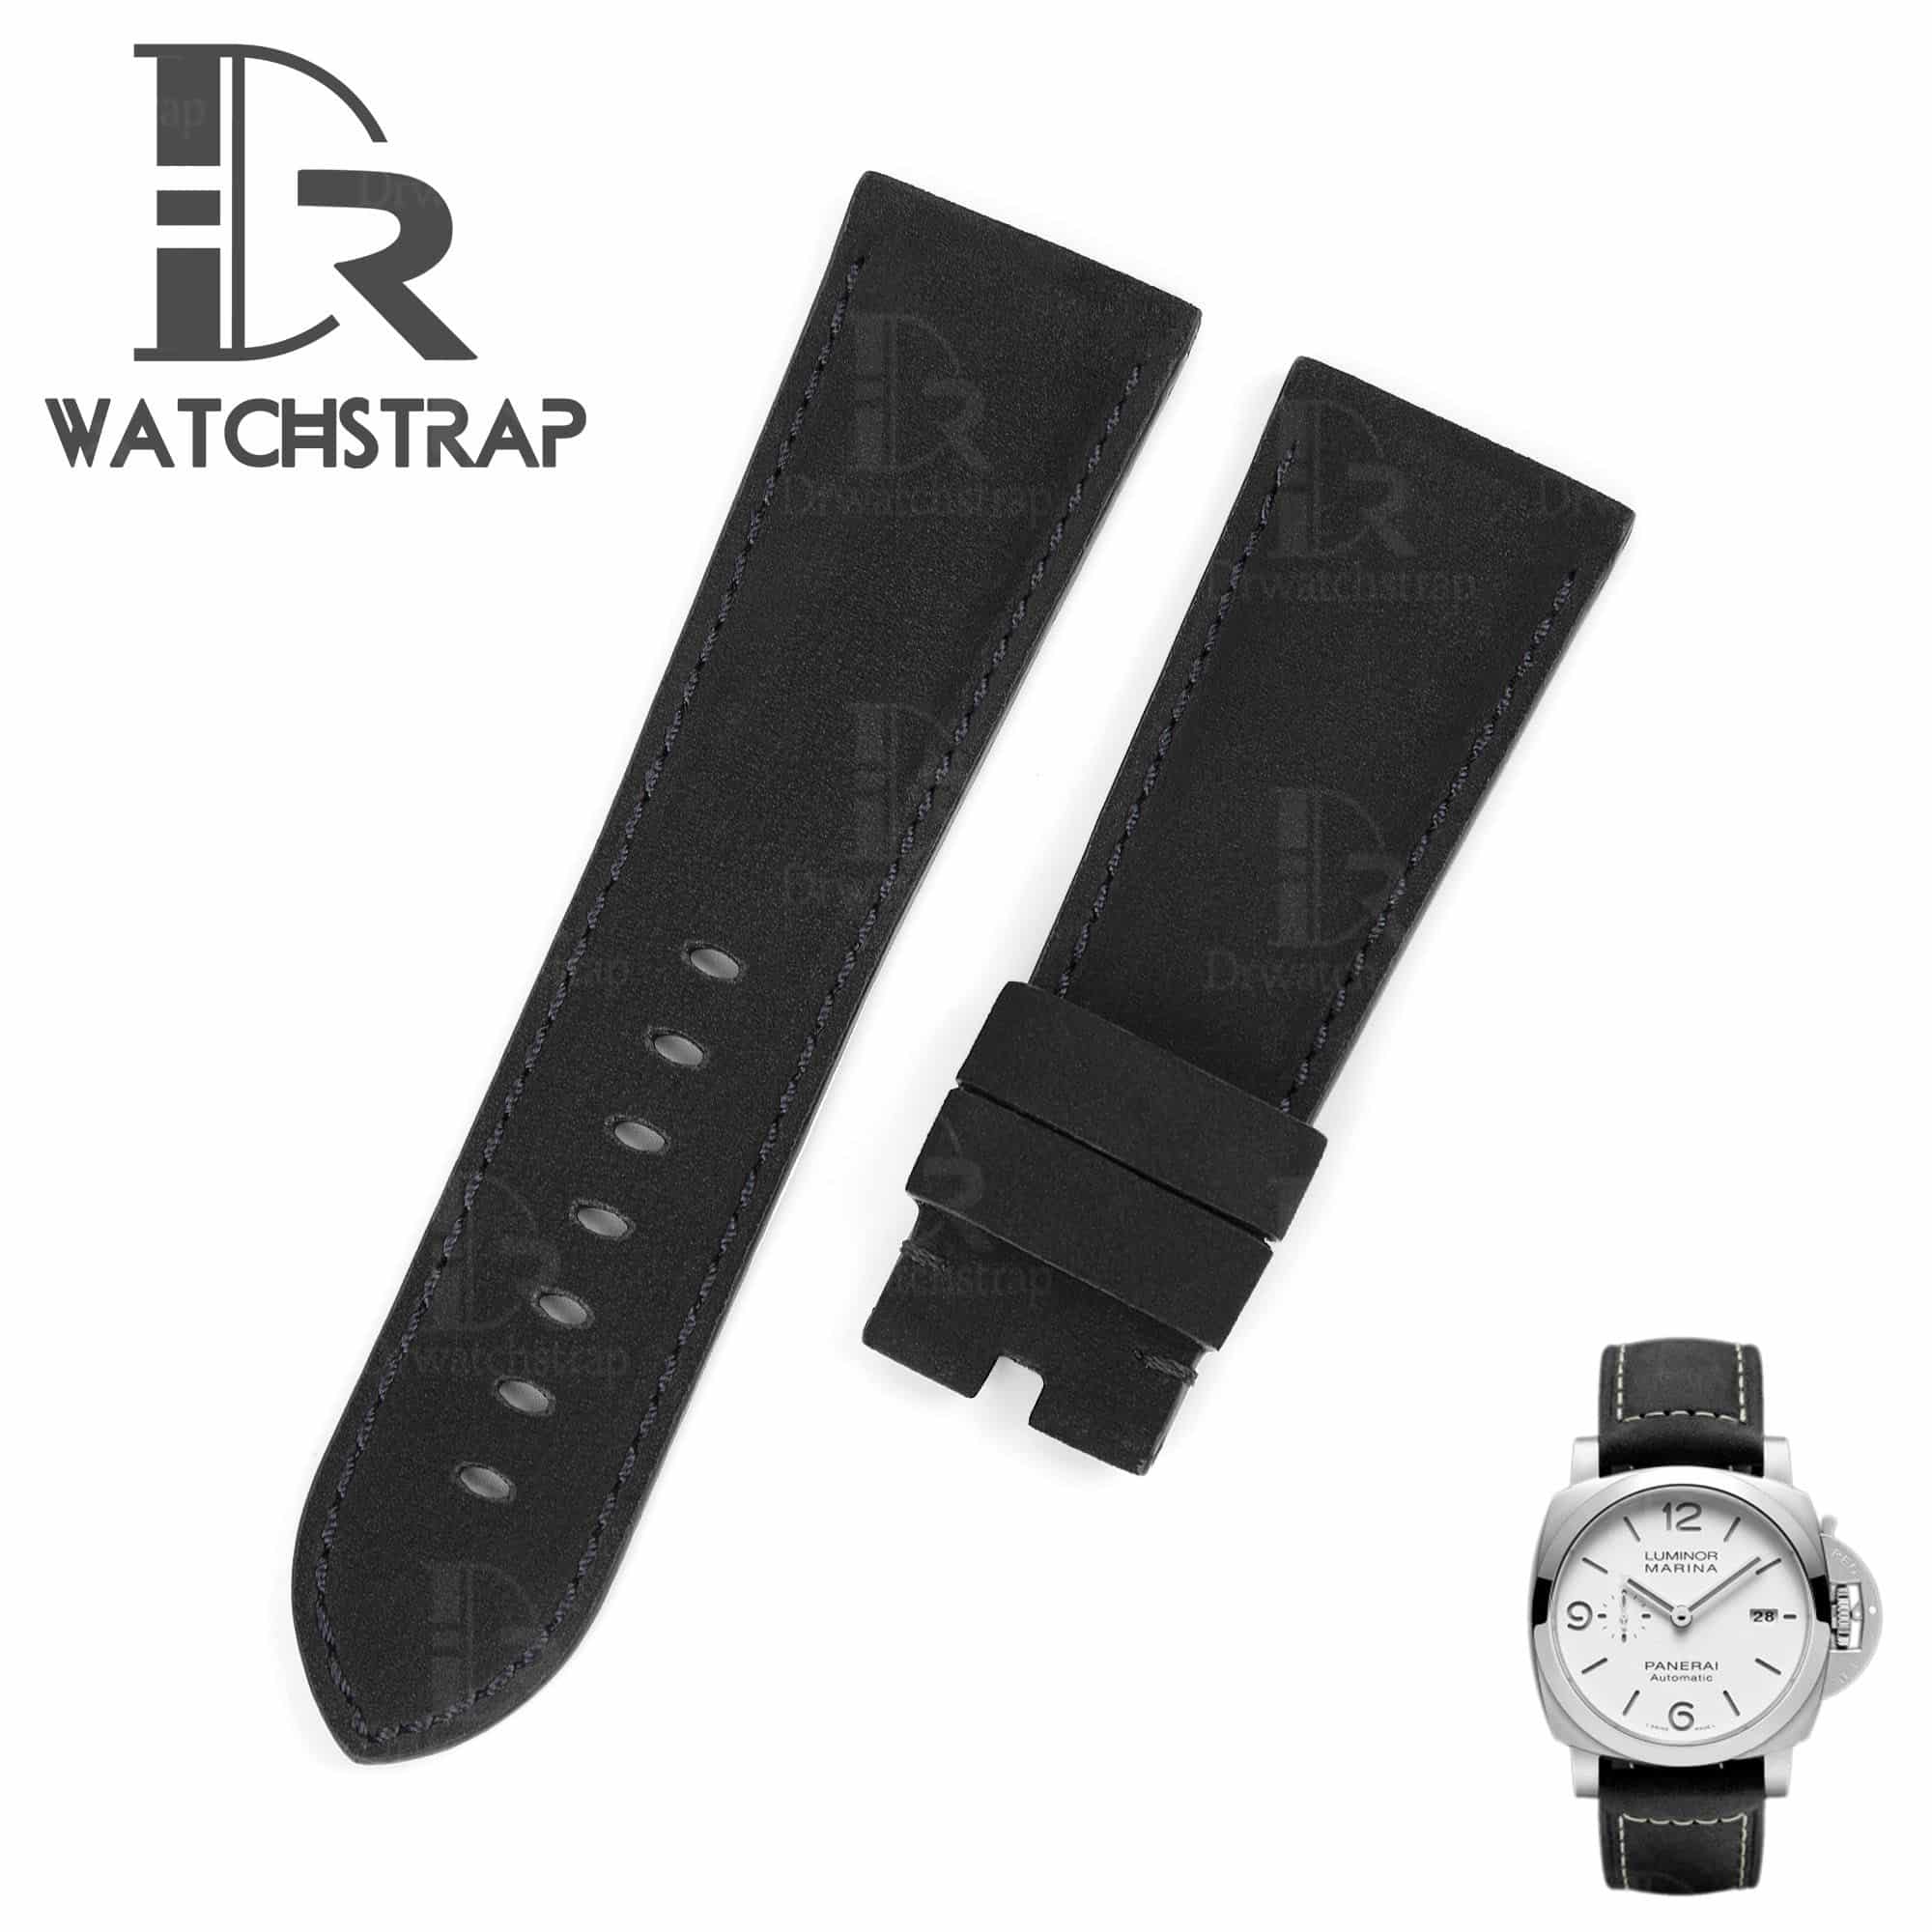 Custom OEM Premium calf material black leather Panerai strap 24mm 26mm 22mm & watch band replacement for Panerai Luminor Due Radiomir luxury watches for sale - Shop the best quality calfskin watch straps and watchbands from DR Watchstrap online at a low price